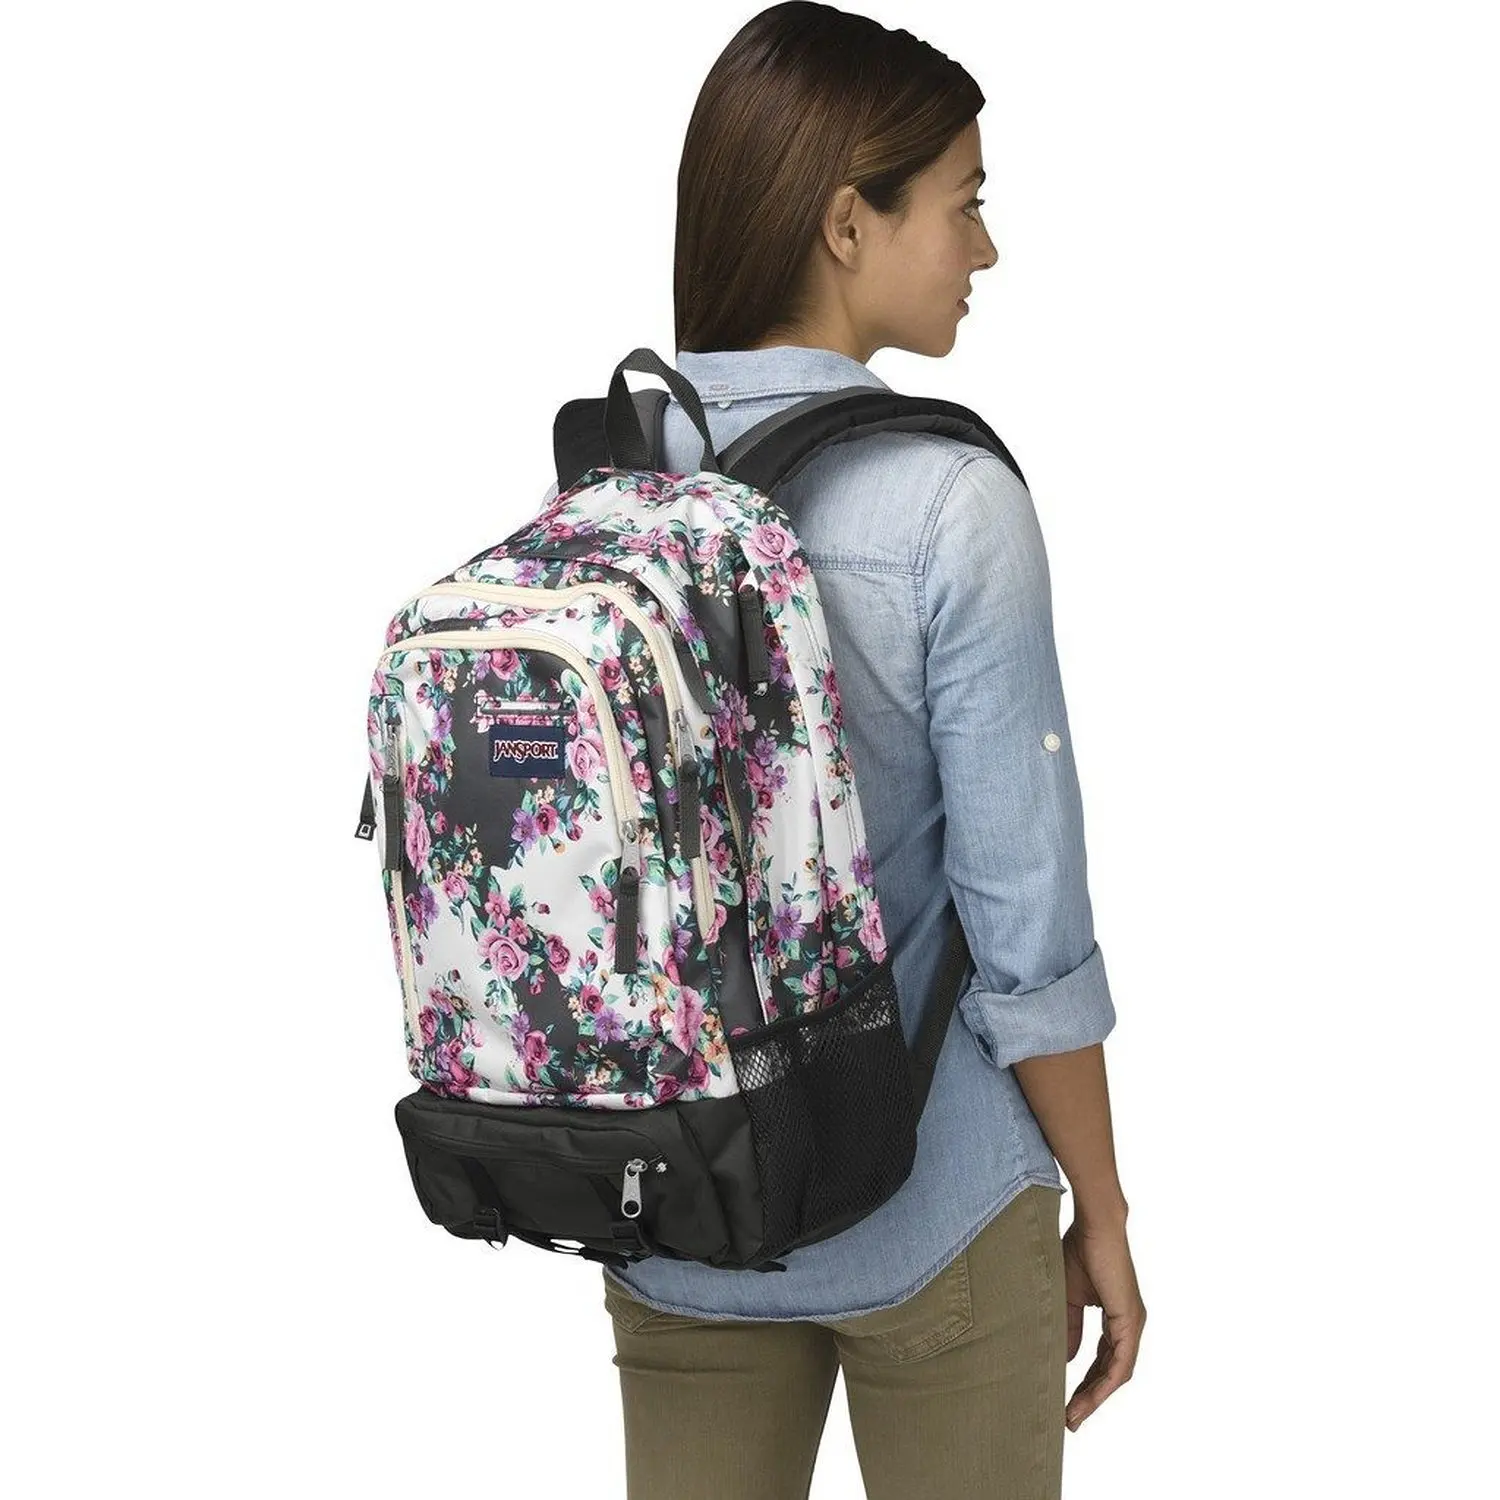 Buy JanSport Envoy Backpack Multi Grey Floral Flourish in Cheap Price on 0